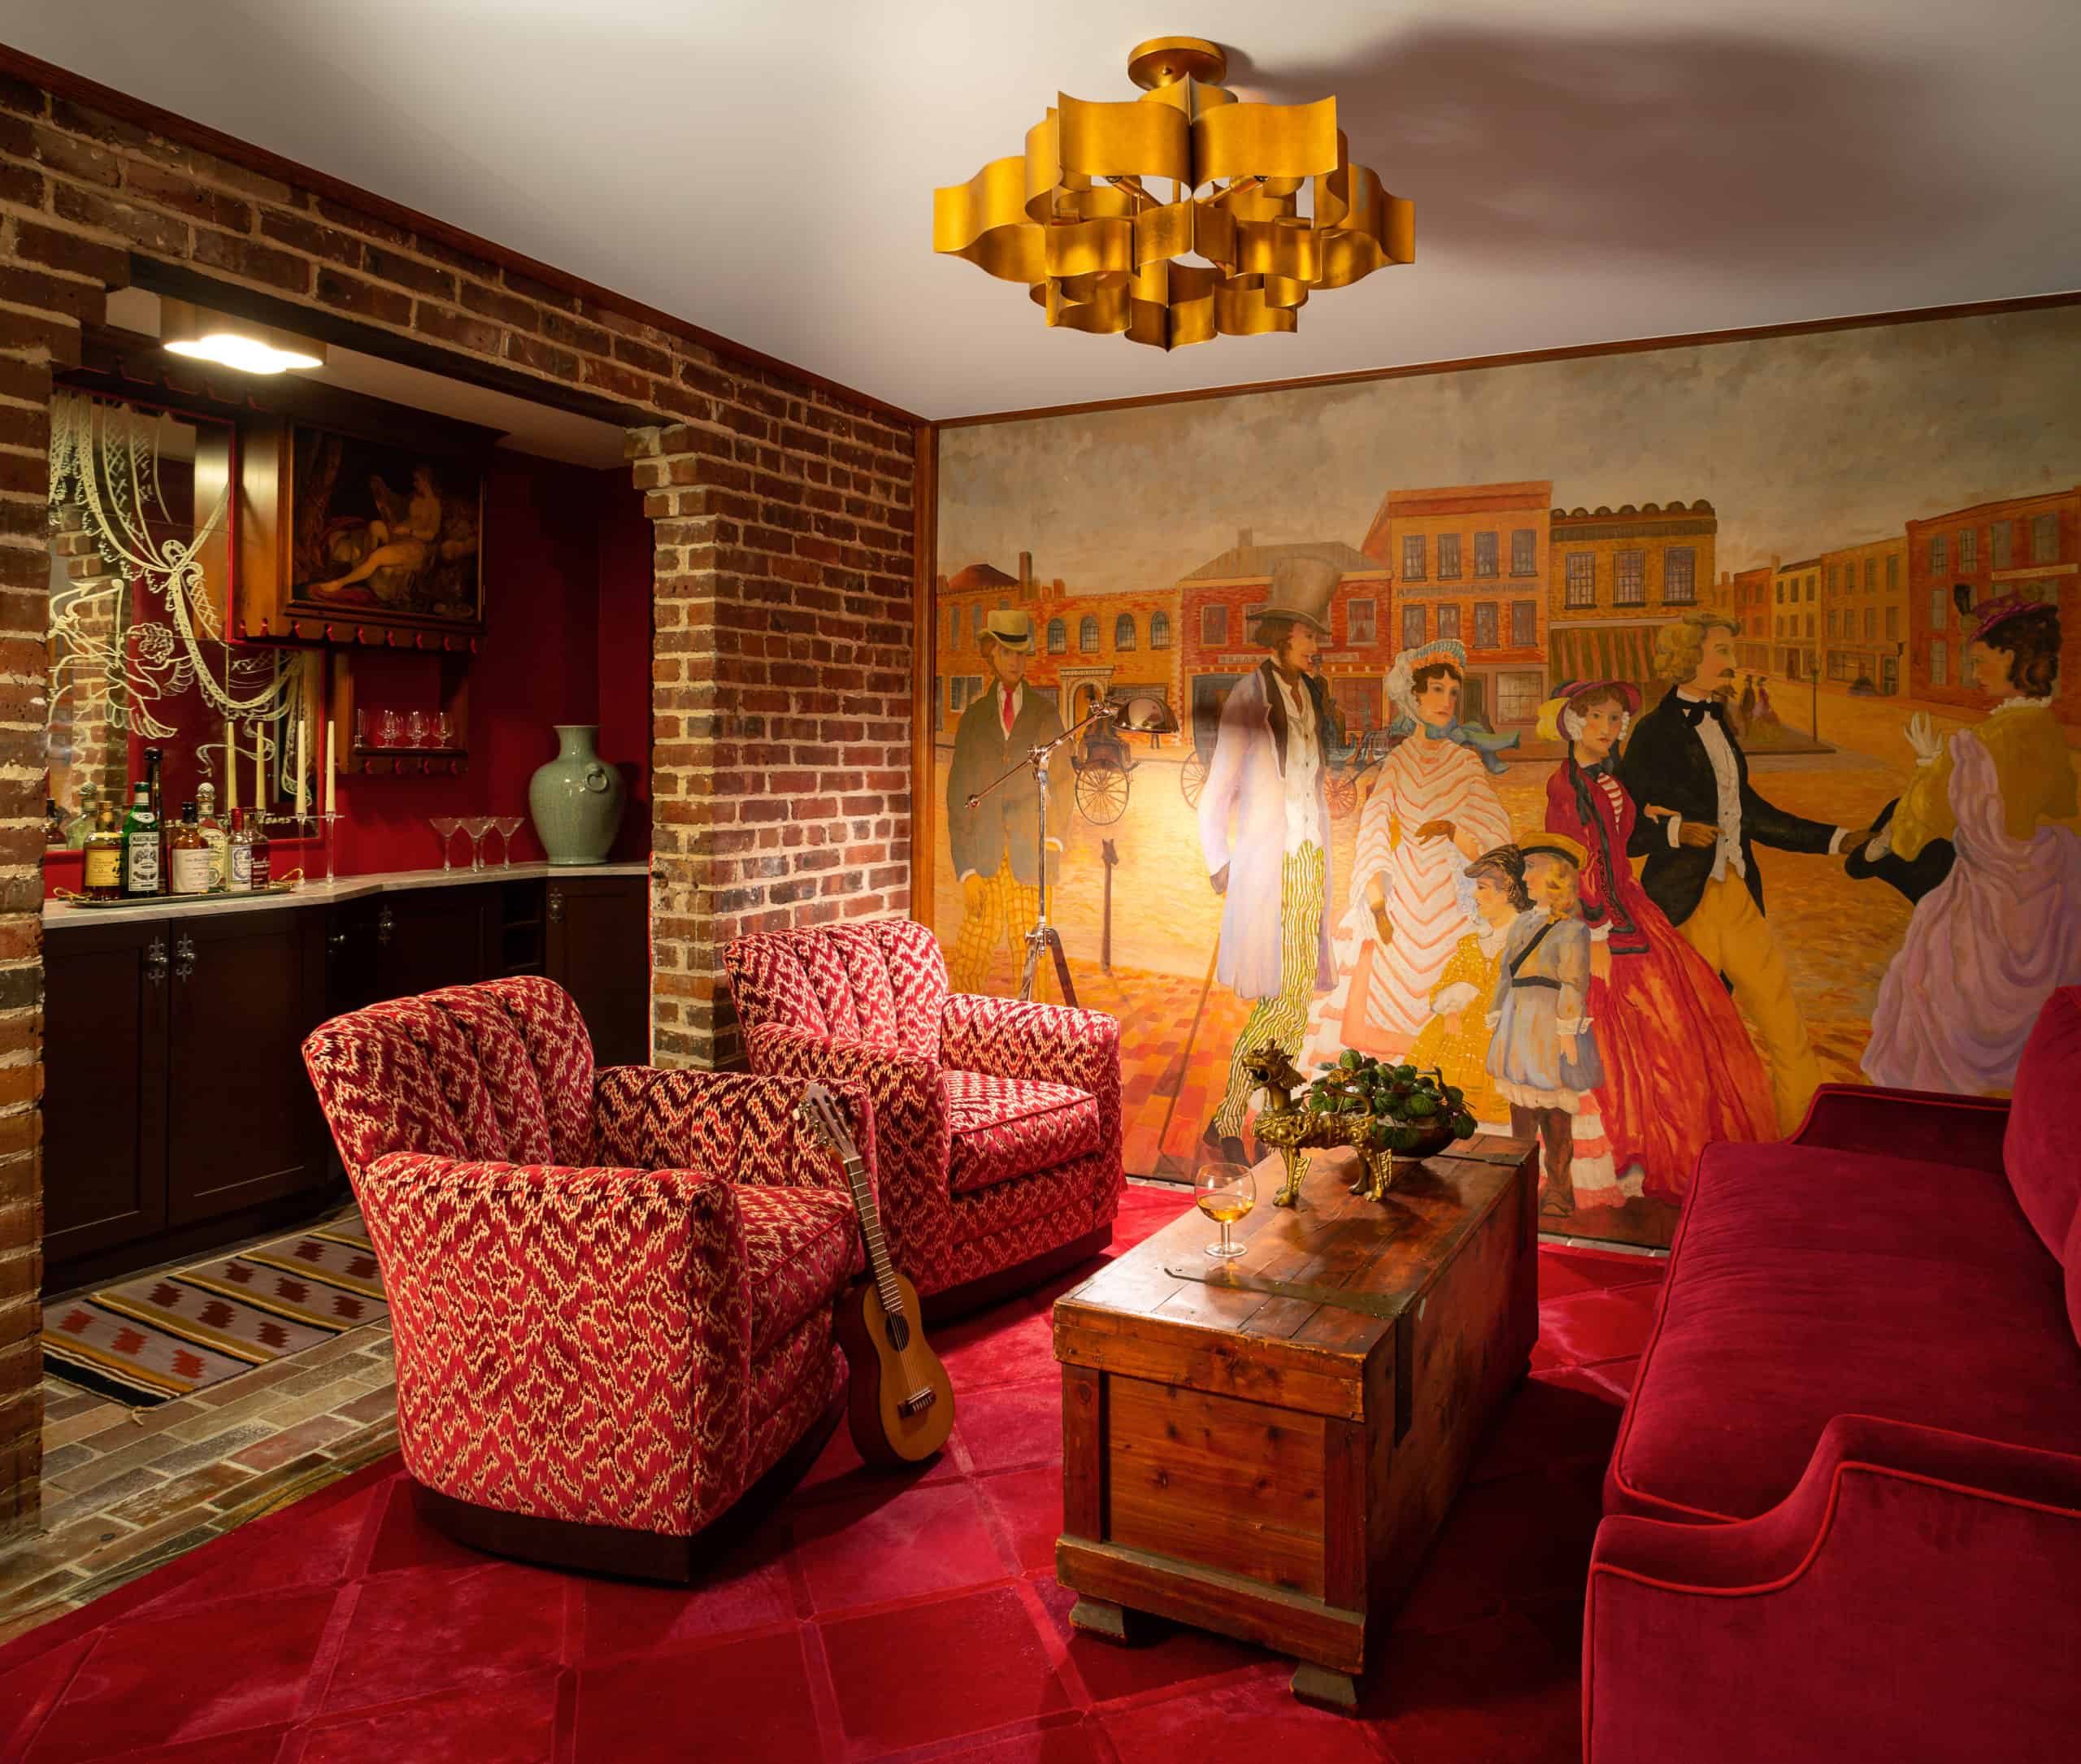 Suductive speakeasy room with painted wall mural